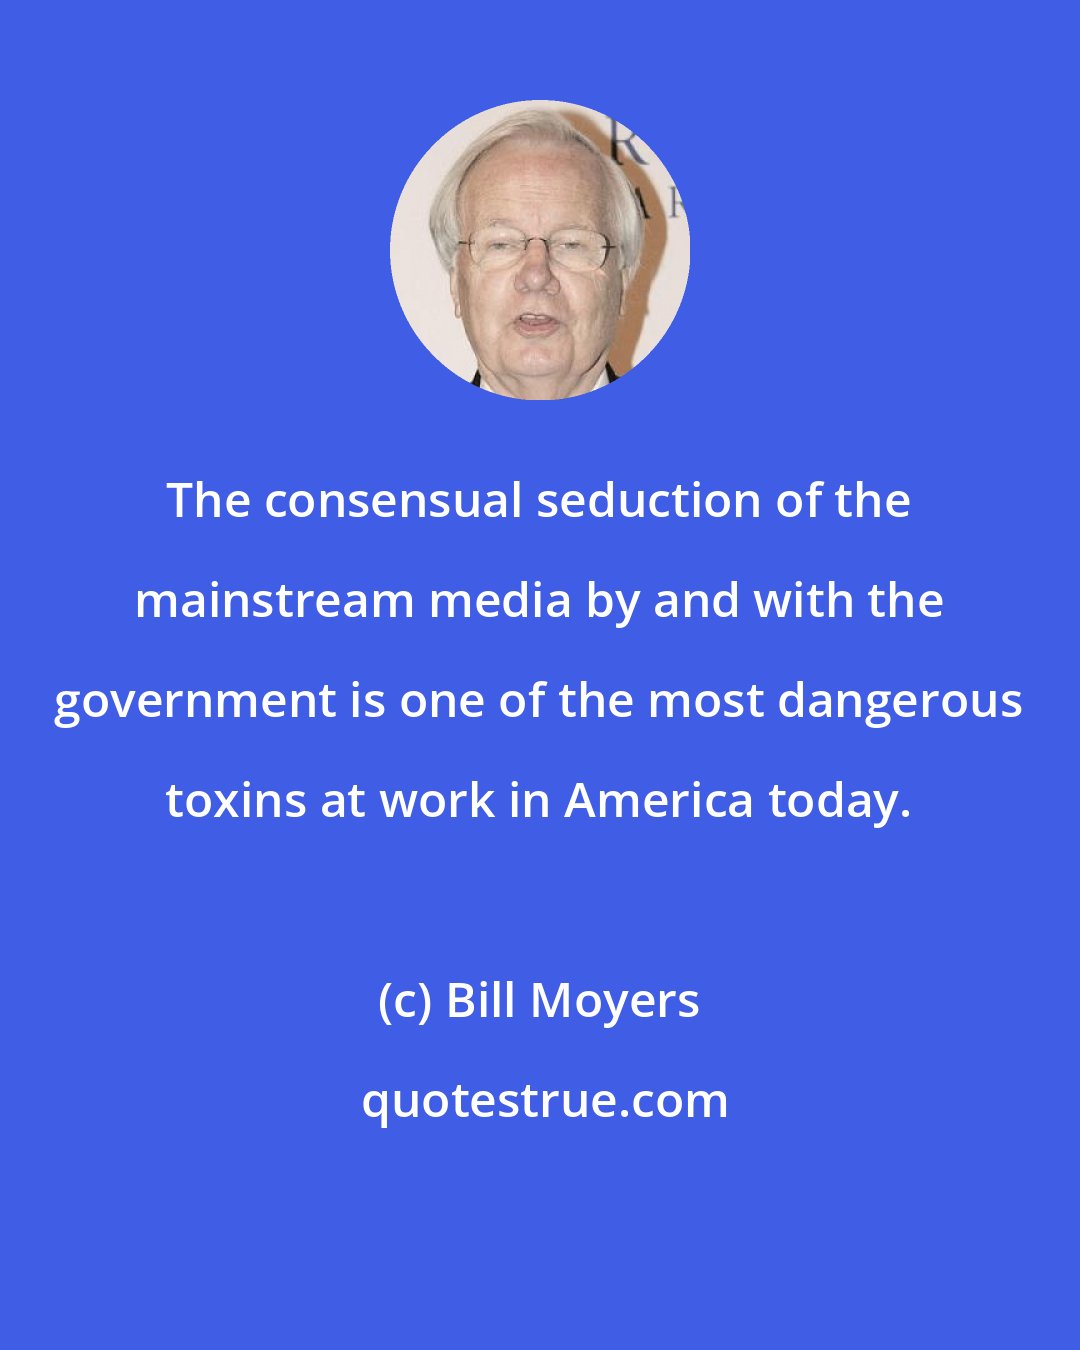 Bill Moyers: The consensual seduction of the mainstream media by and with the government is one of the most dangerous toxins at work in America today.